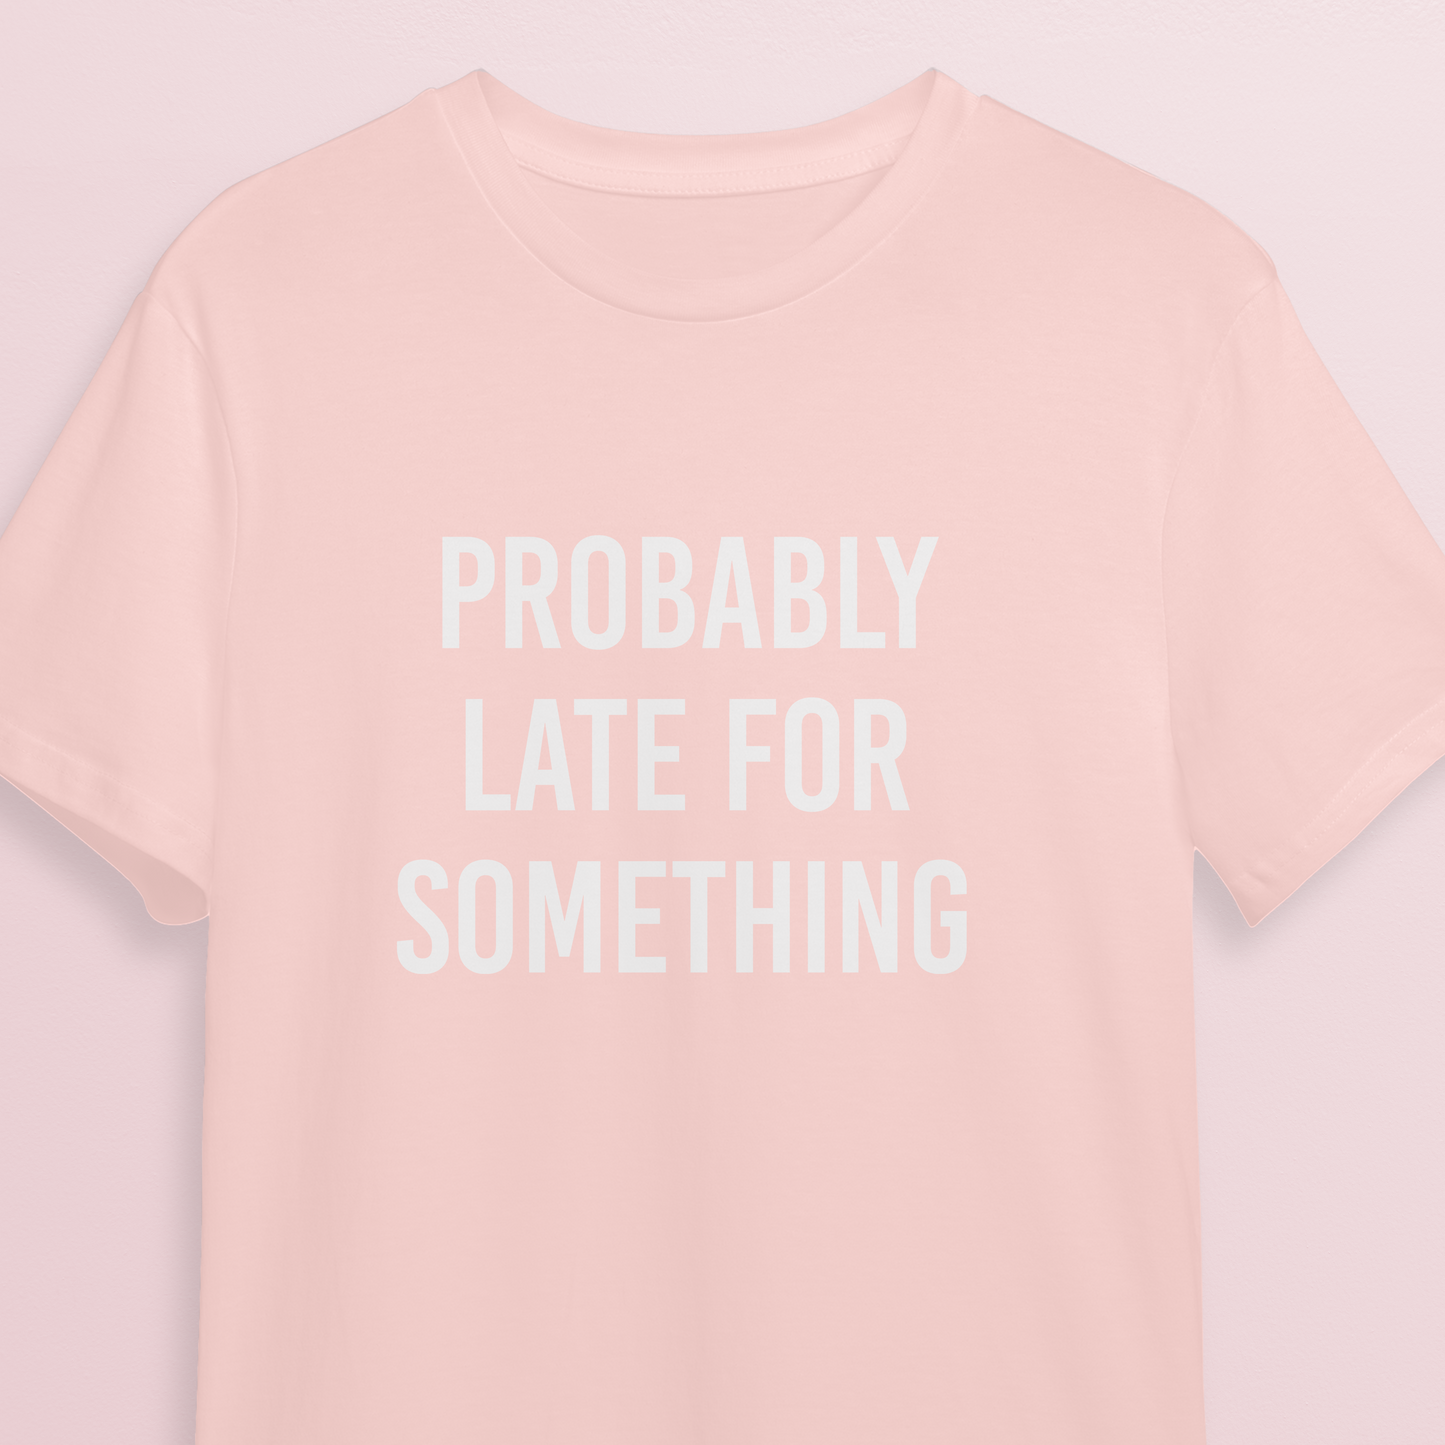 T-shirt - Probably late - Soft rose